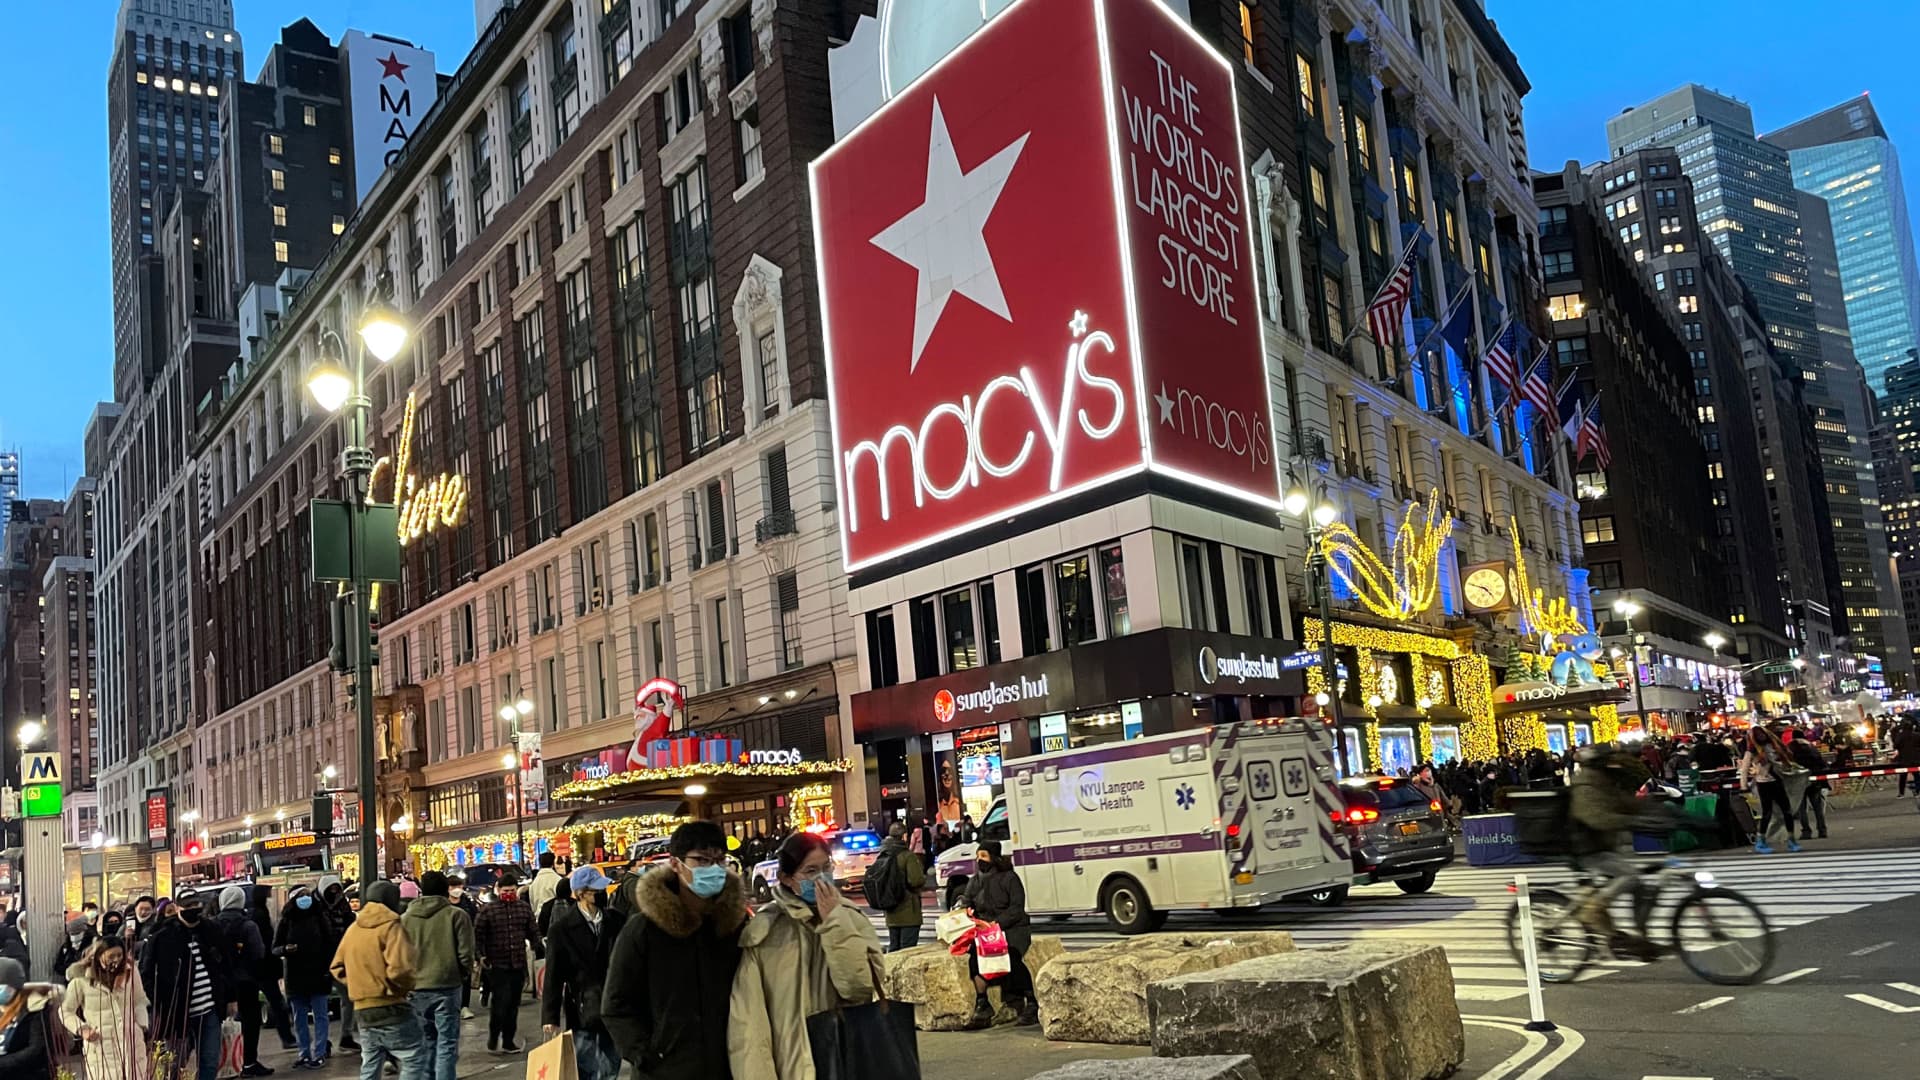 Macy’s settles proxy fight with activist Arkhouse, adds two directors